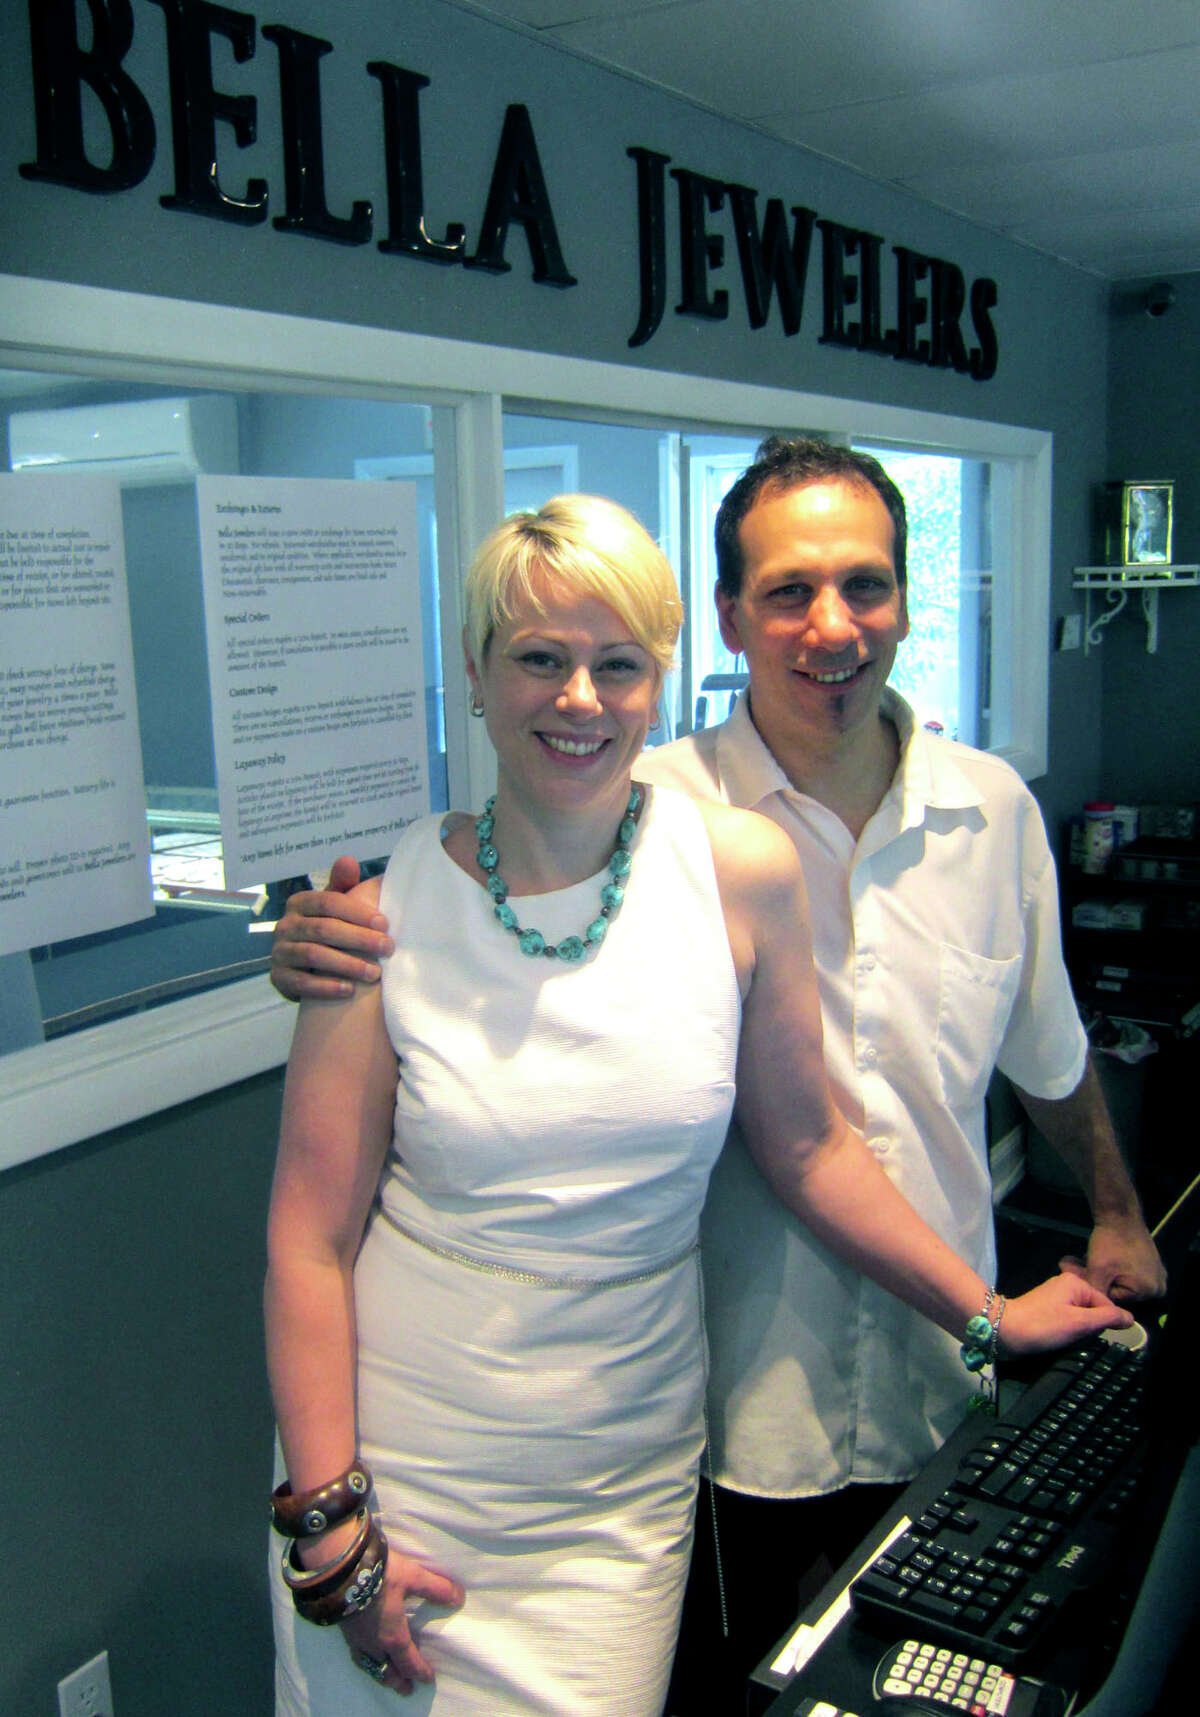 Michelle and Peter Fusaro have settled their Bella Jewelers business comfortably at 214 Danbury Road in New Milford. Bela is now in its 11th year in the community. June 2012